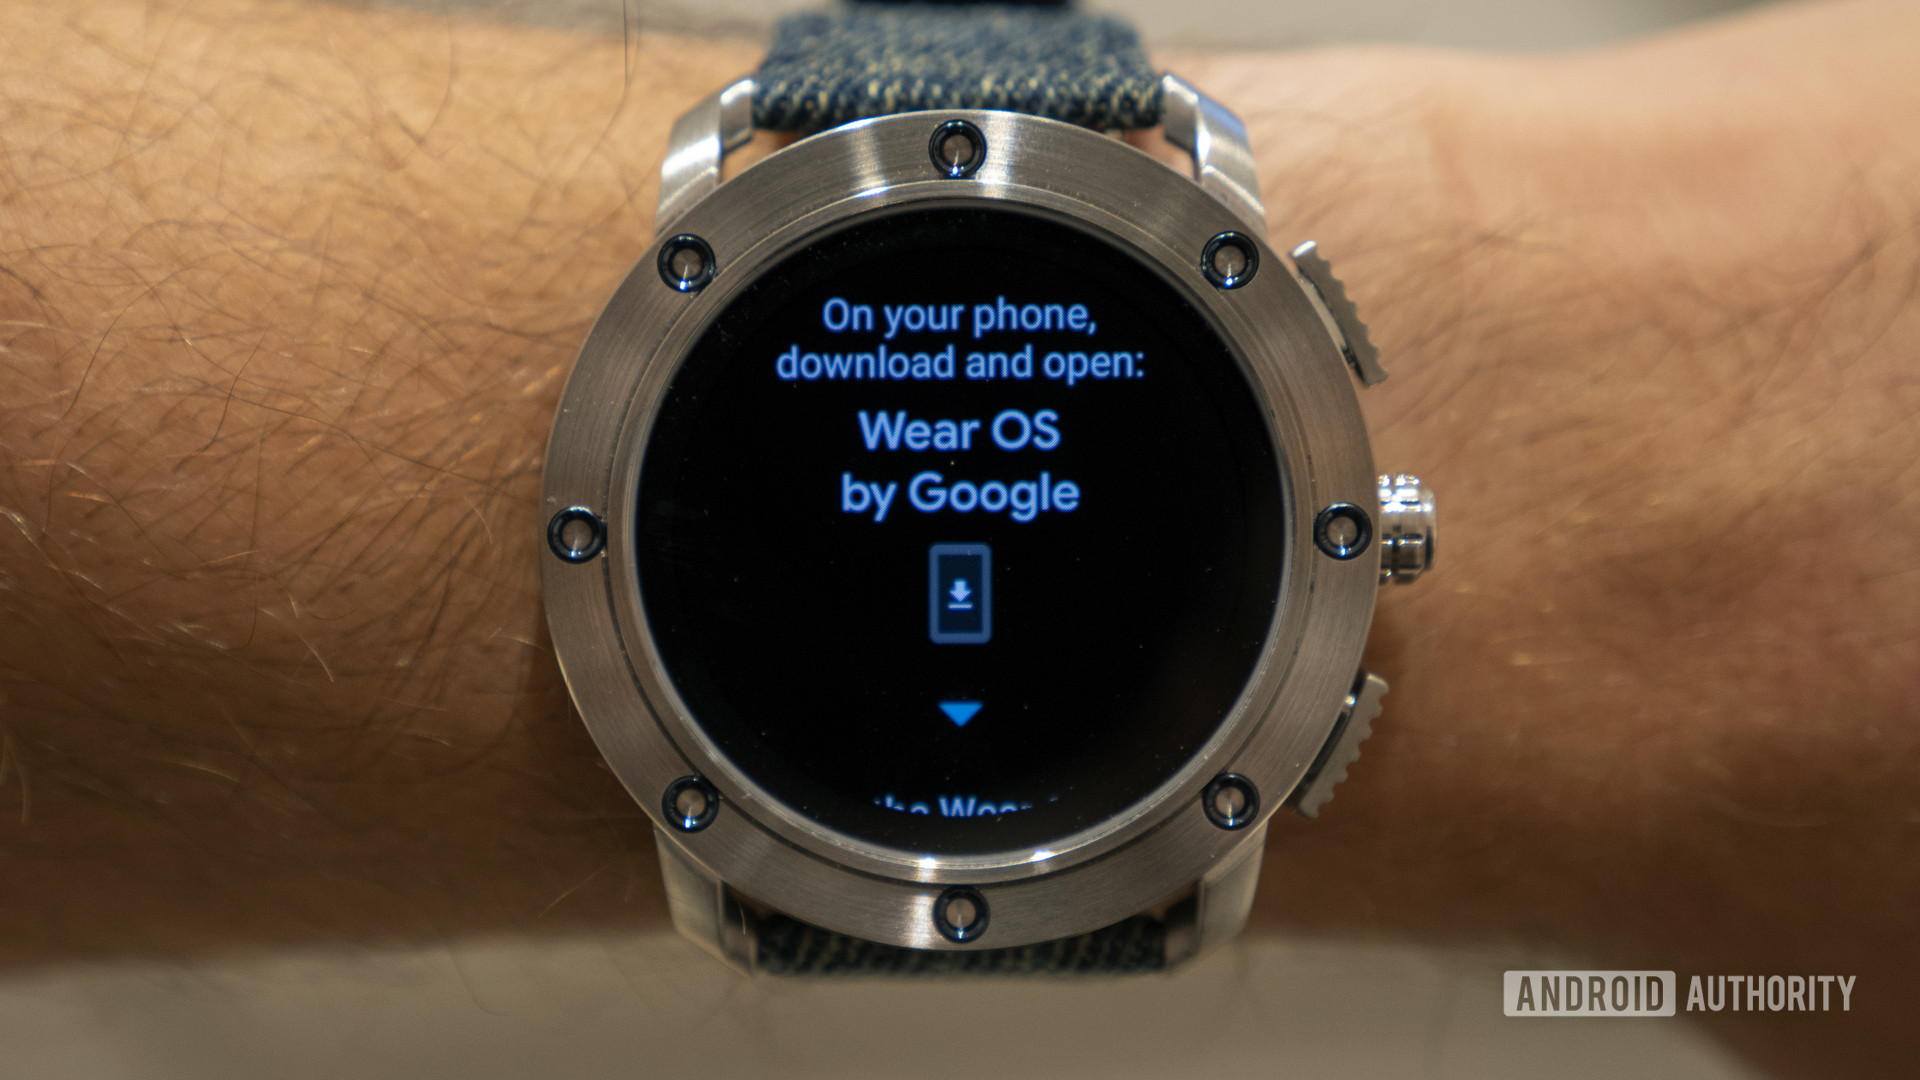 OEMs currently make Wear OS watches, but a Google watch was in the works.